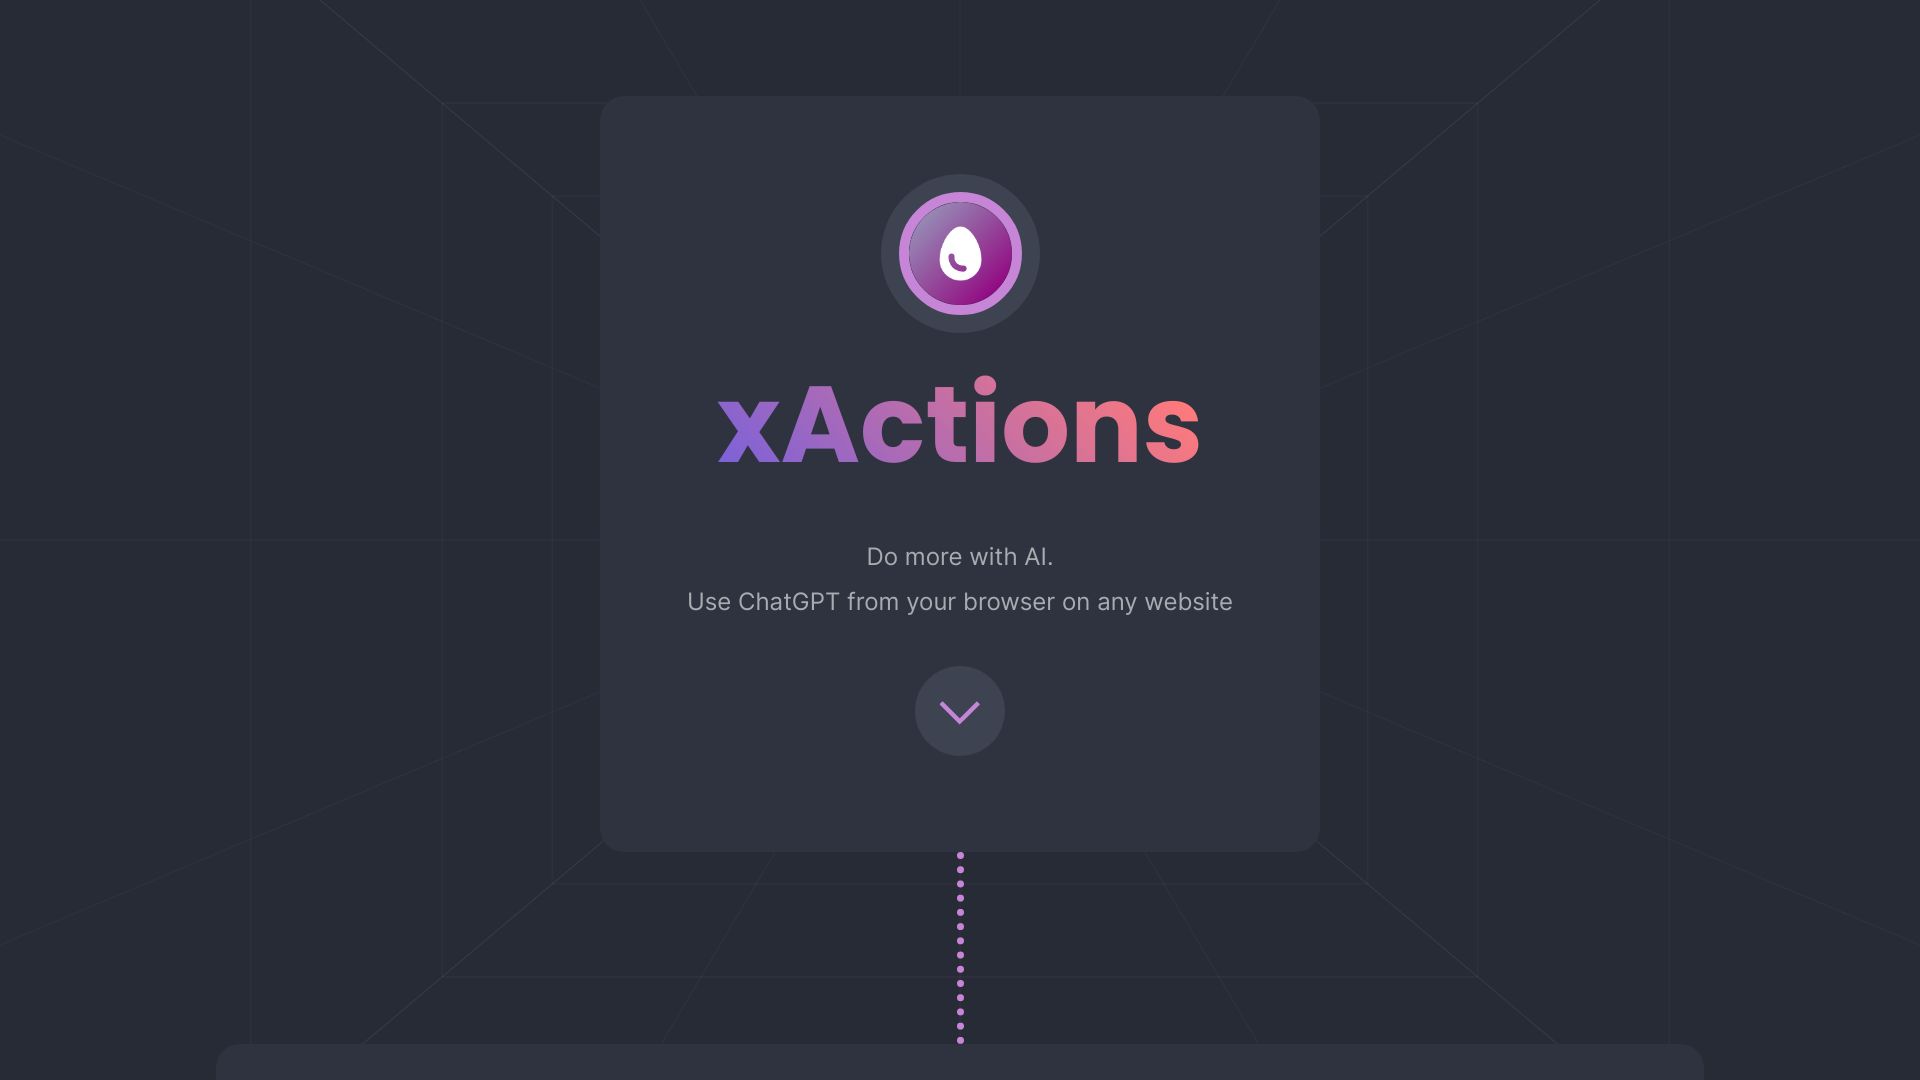 xActions - ChatGPT in a Better Way